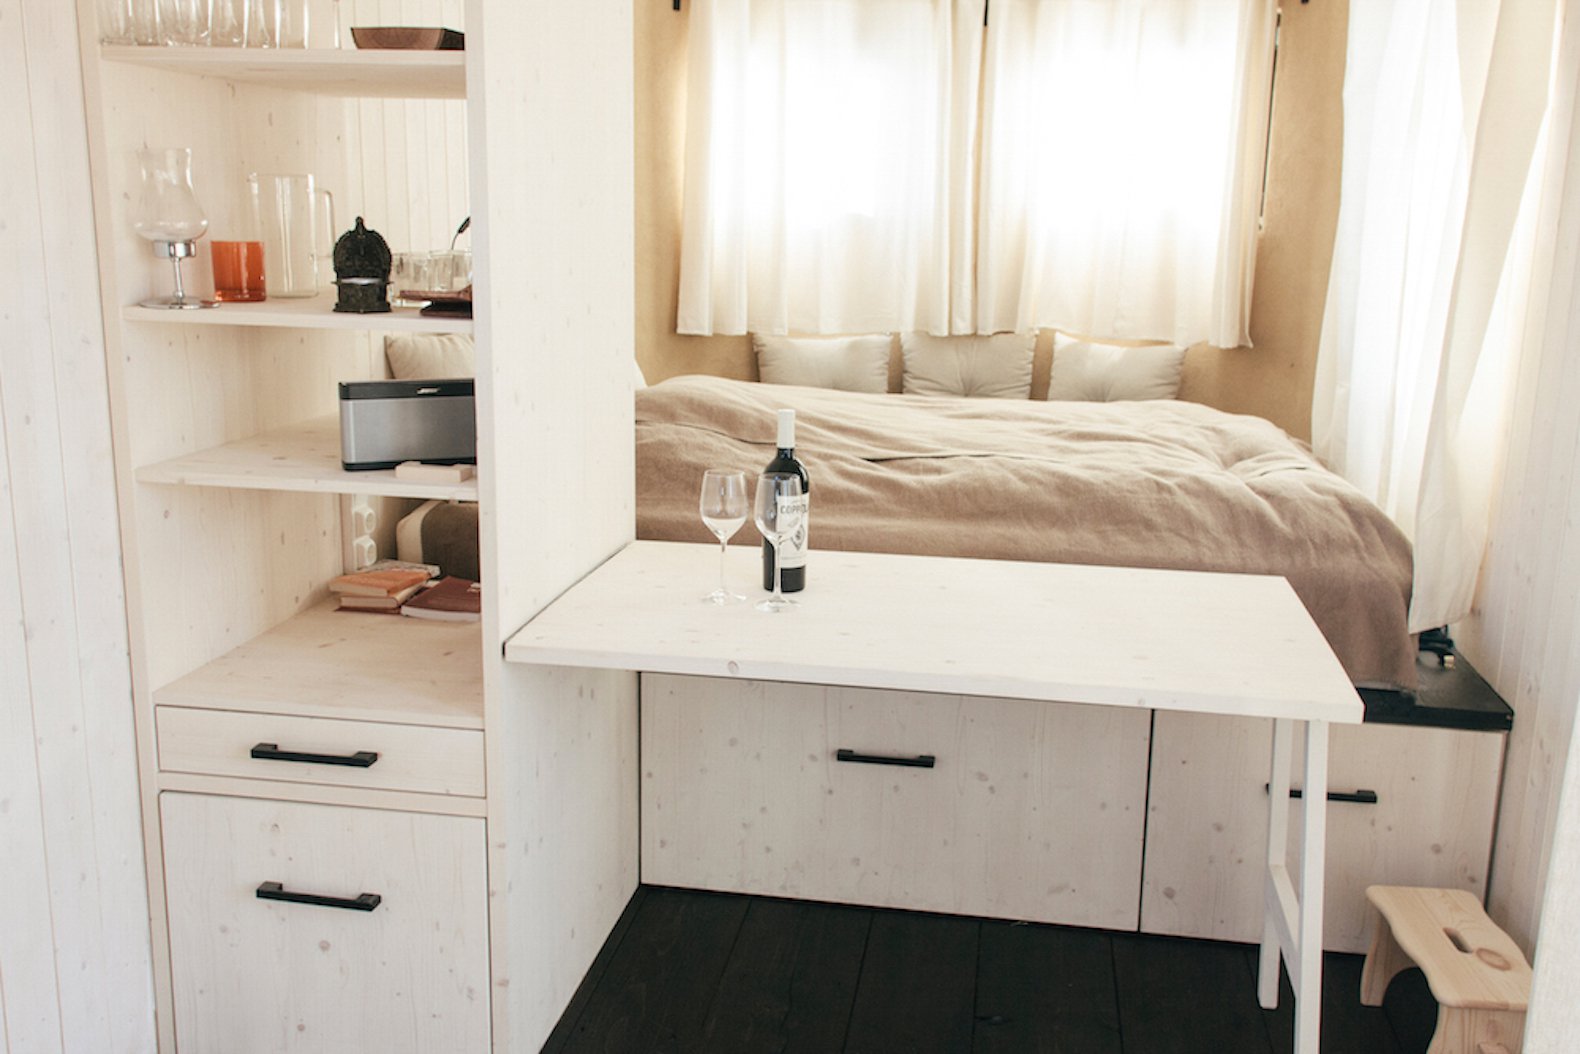 Live Off-Grid & Travel In This Beautiful Tiny Home Caravan - Take A Look Inside!